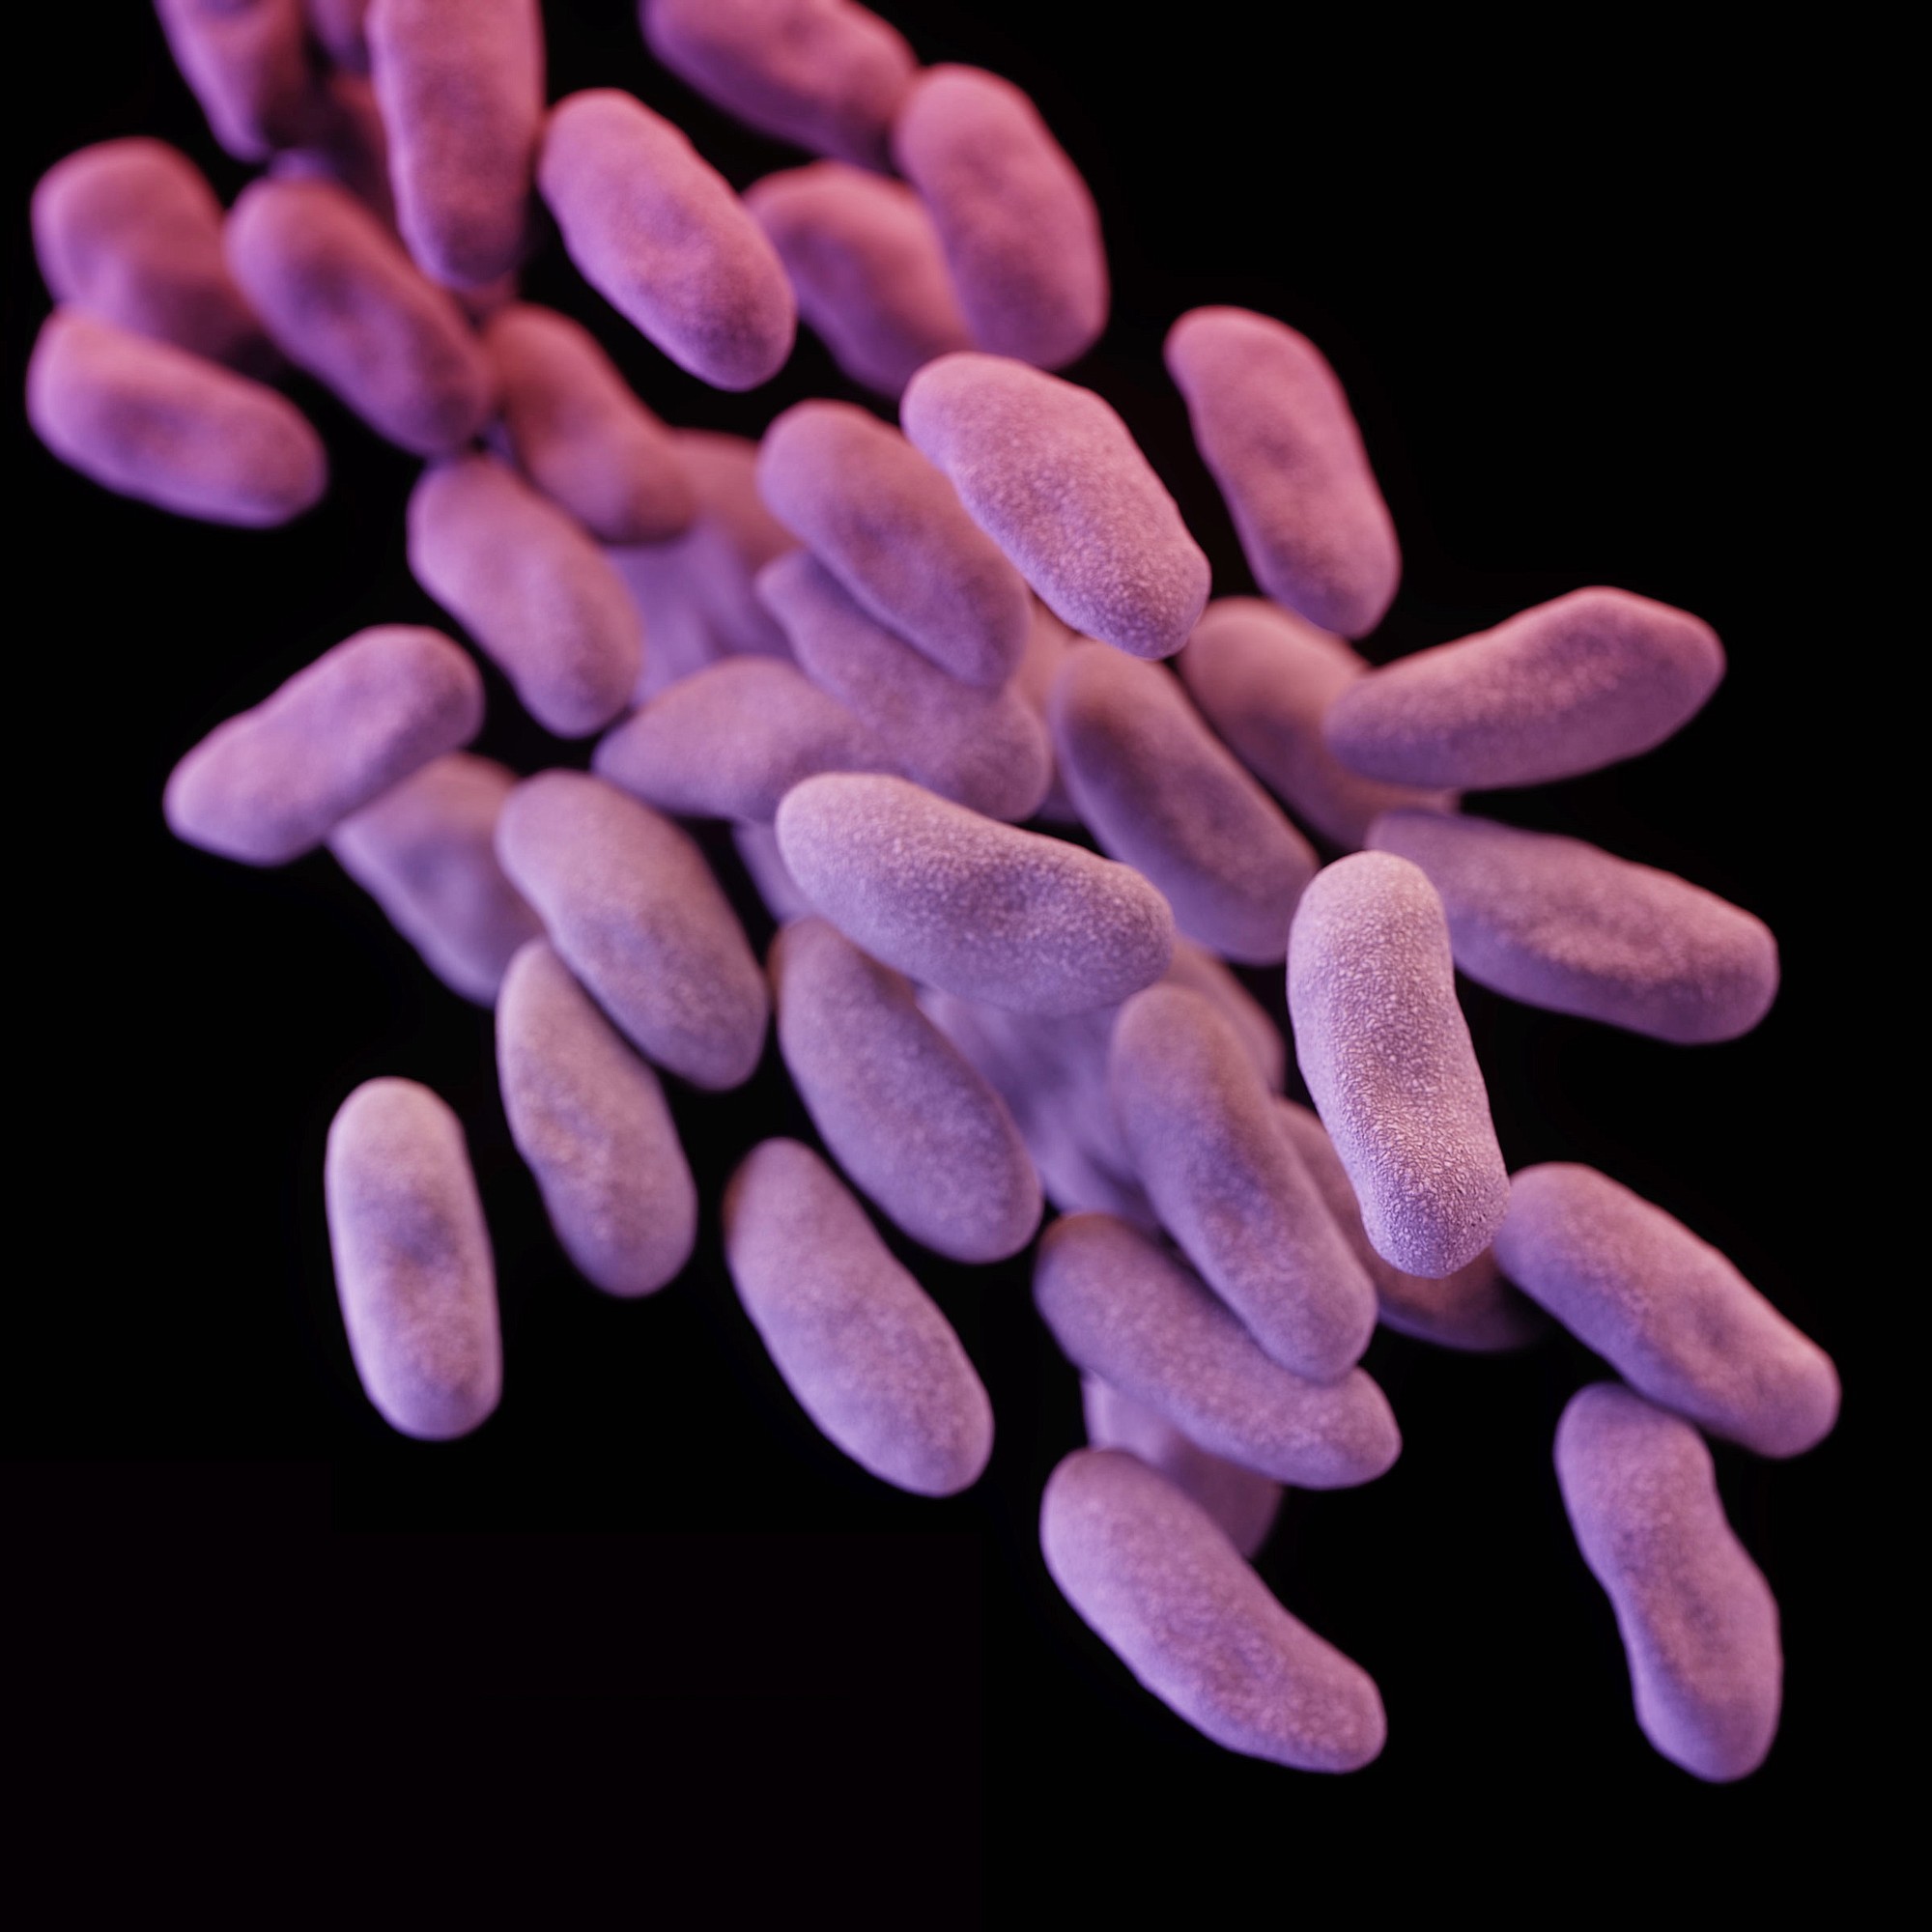 This illustration released by the Centers for Disease Control depicts a 3-D computer-generated image of a group of carbapenem-resistant Enterobacteriaceae bacteria. The artistic recreation was based upon scanning electron micrographic imagery.